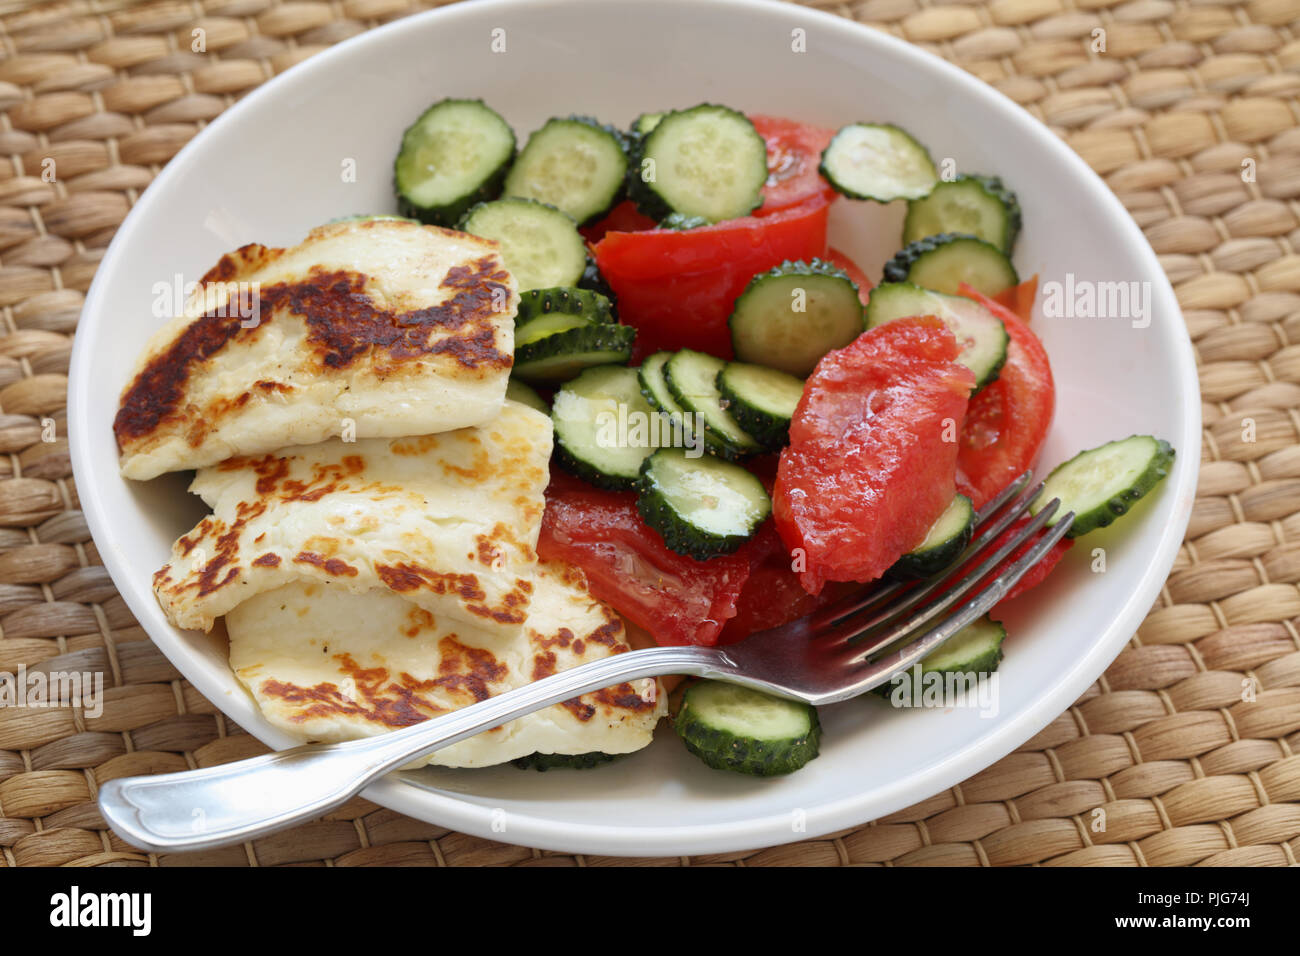 Roasted halloumi cheese with tomato and cucumber salad closeup Stock Photo